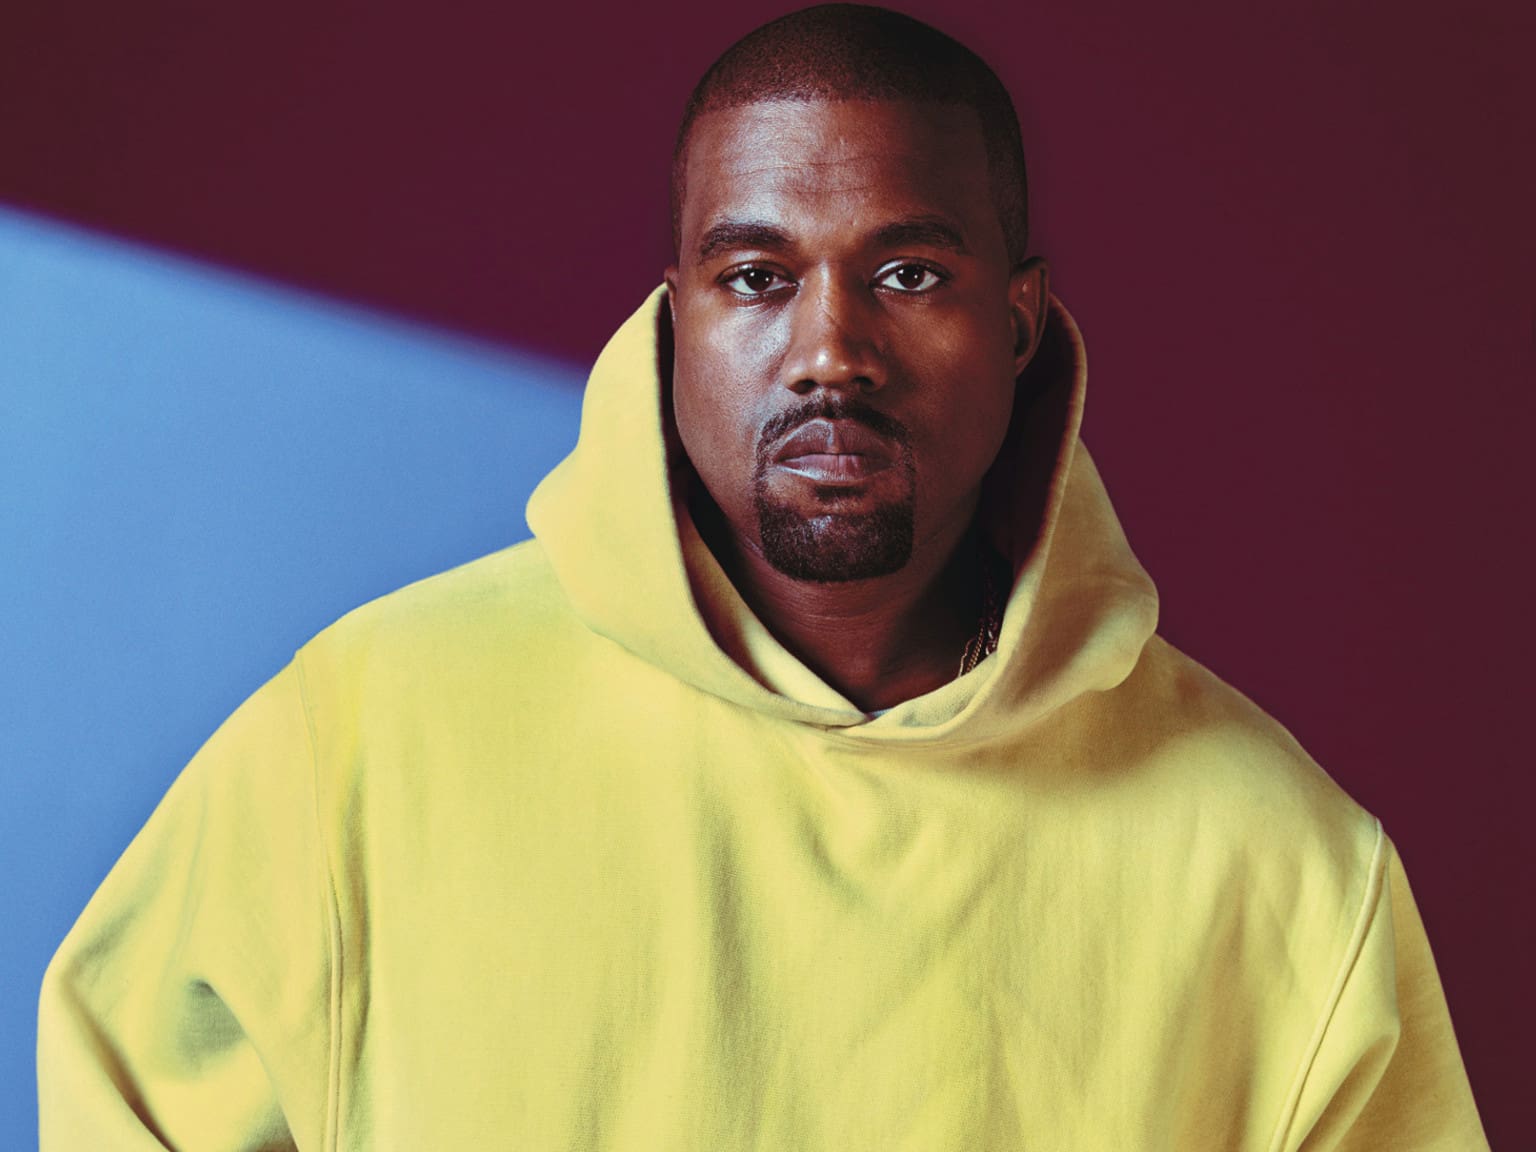 Kanye West Dropped Out Of Joel Osteen's Sunday Service - Here Are All The Details